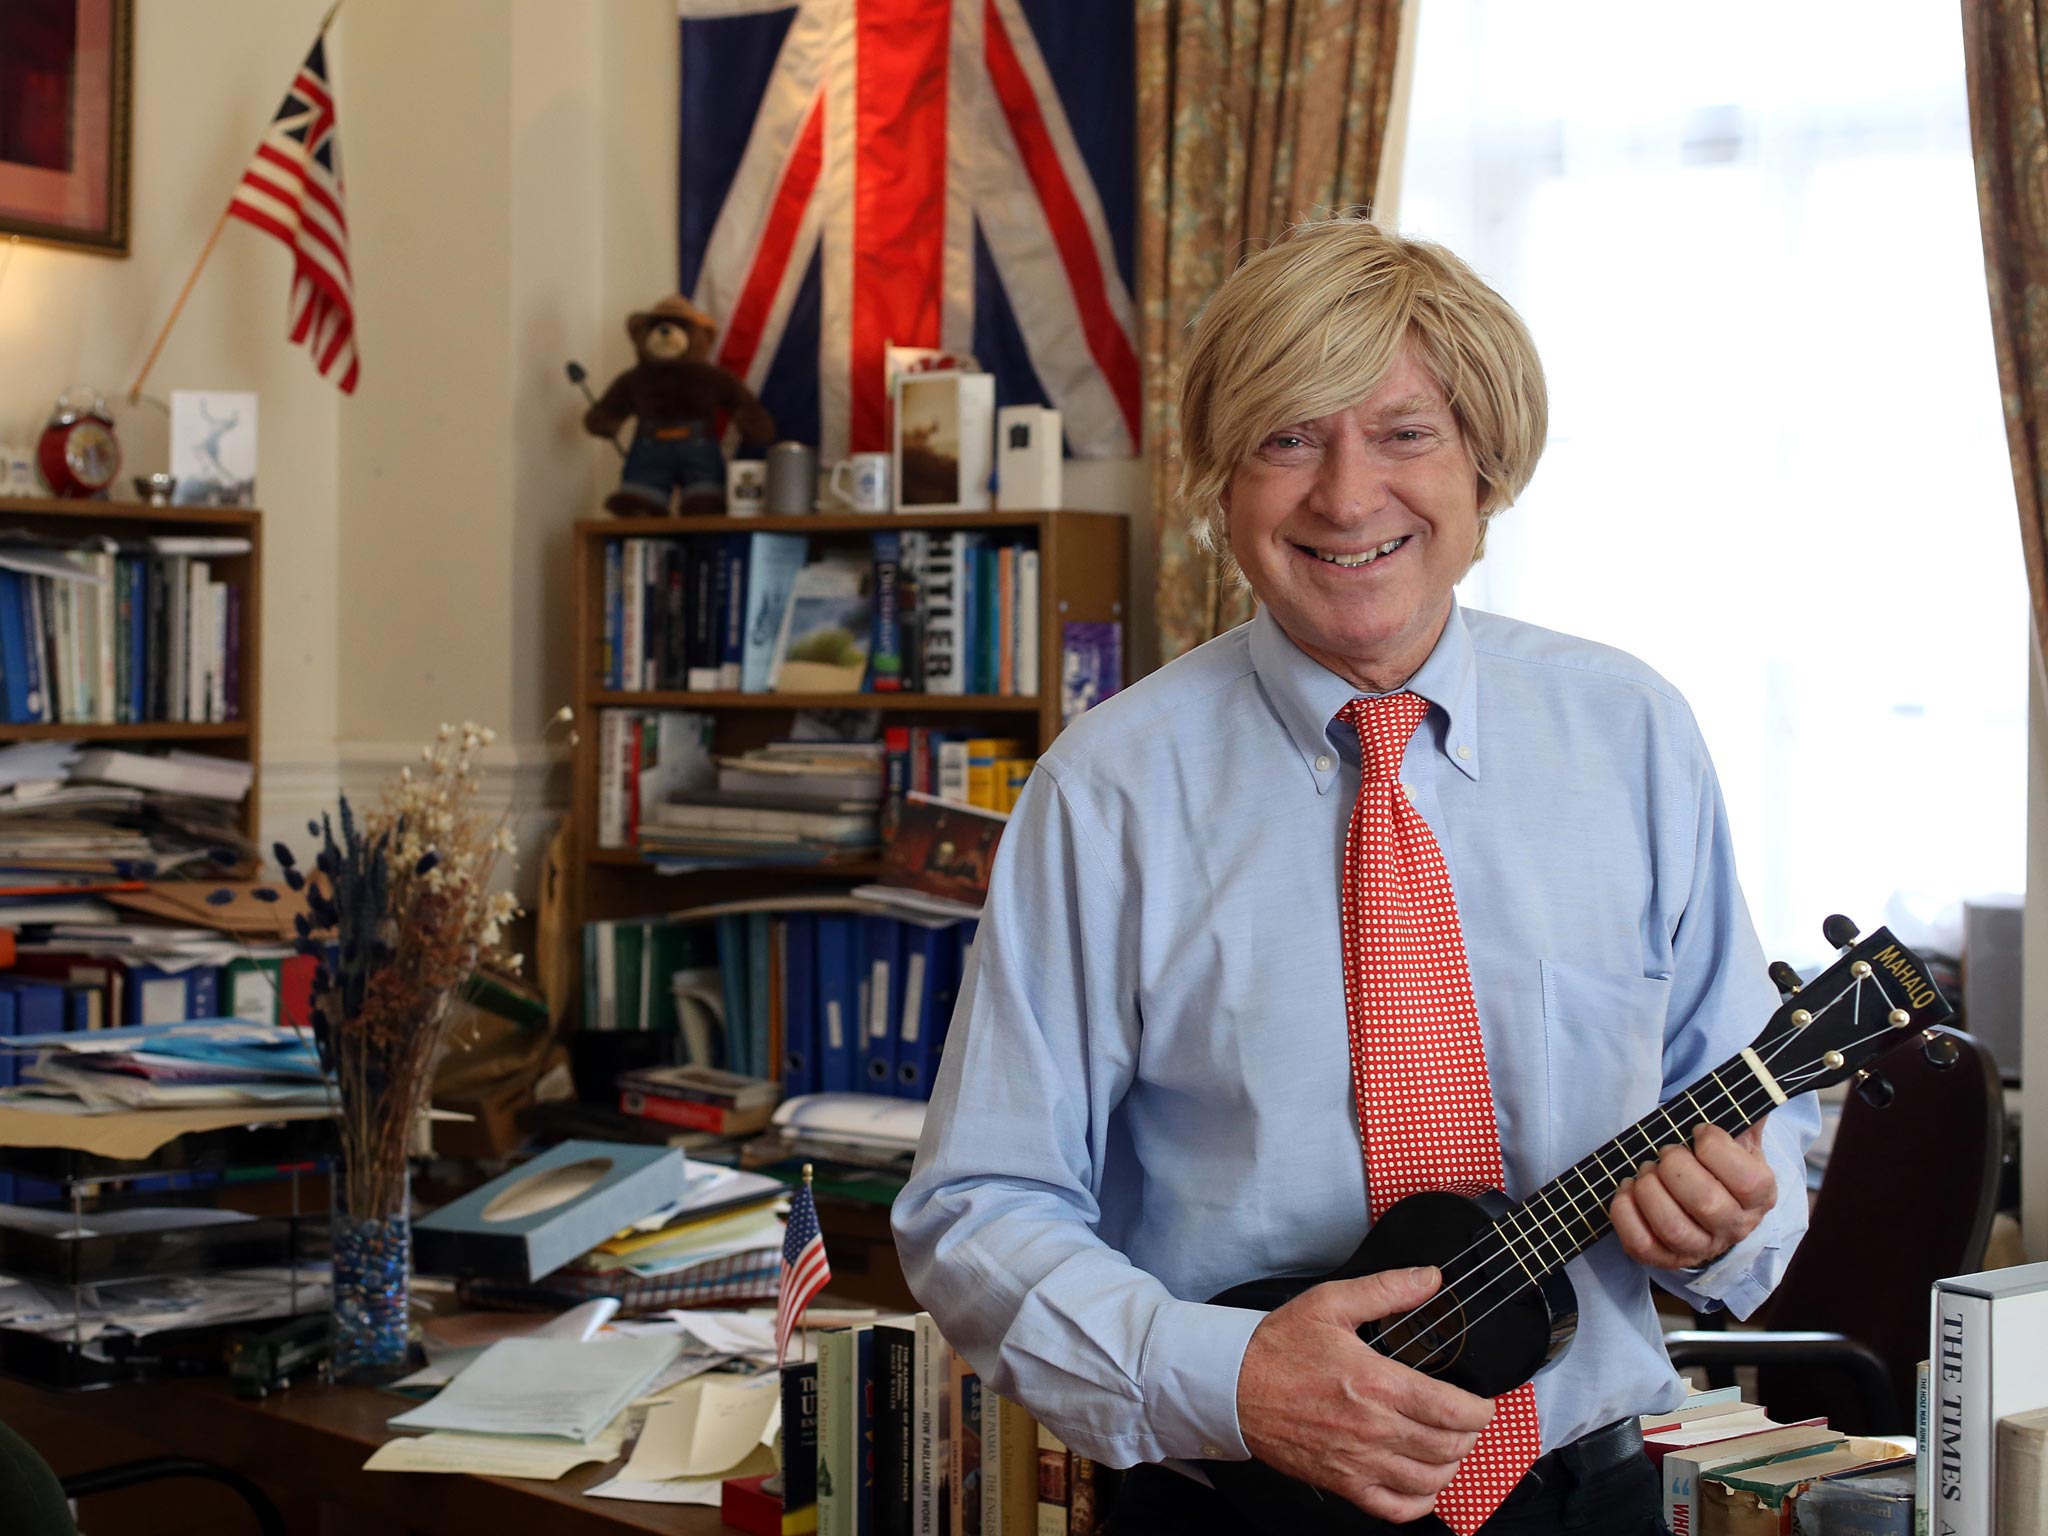 Michael Fabricant announced his departure on Twitter